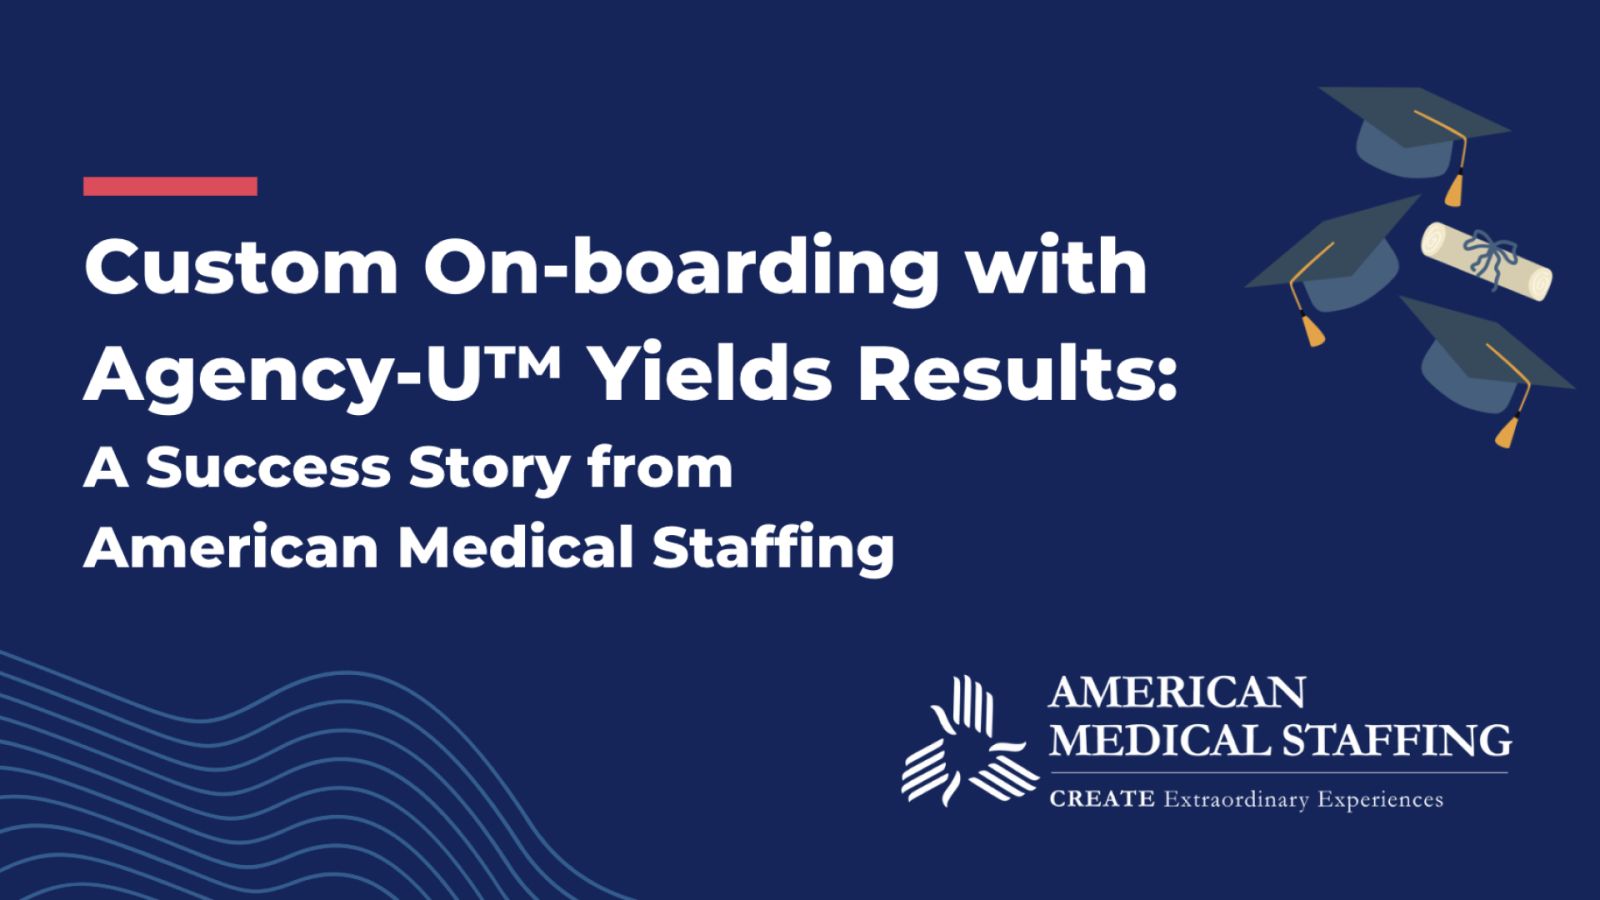 Custom On-boarding with Agency-UTM Yields Results: A Success Story from American Medical Staffing